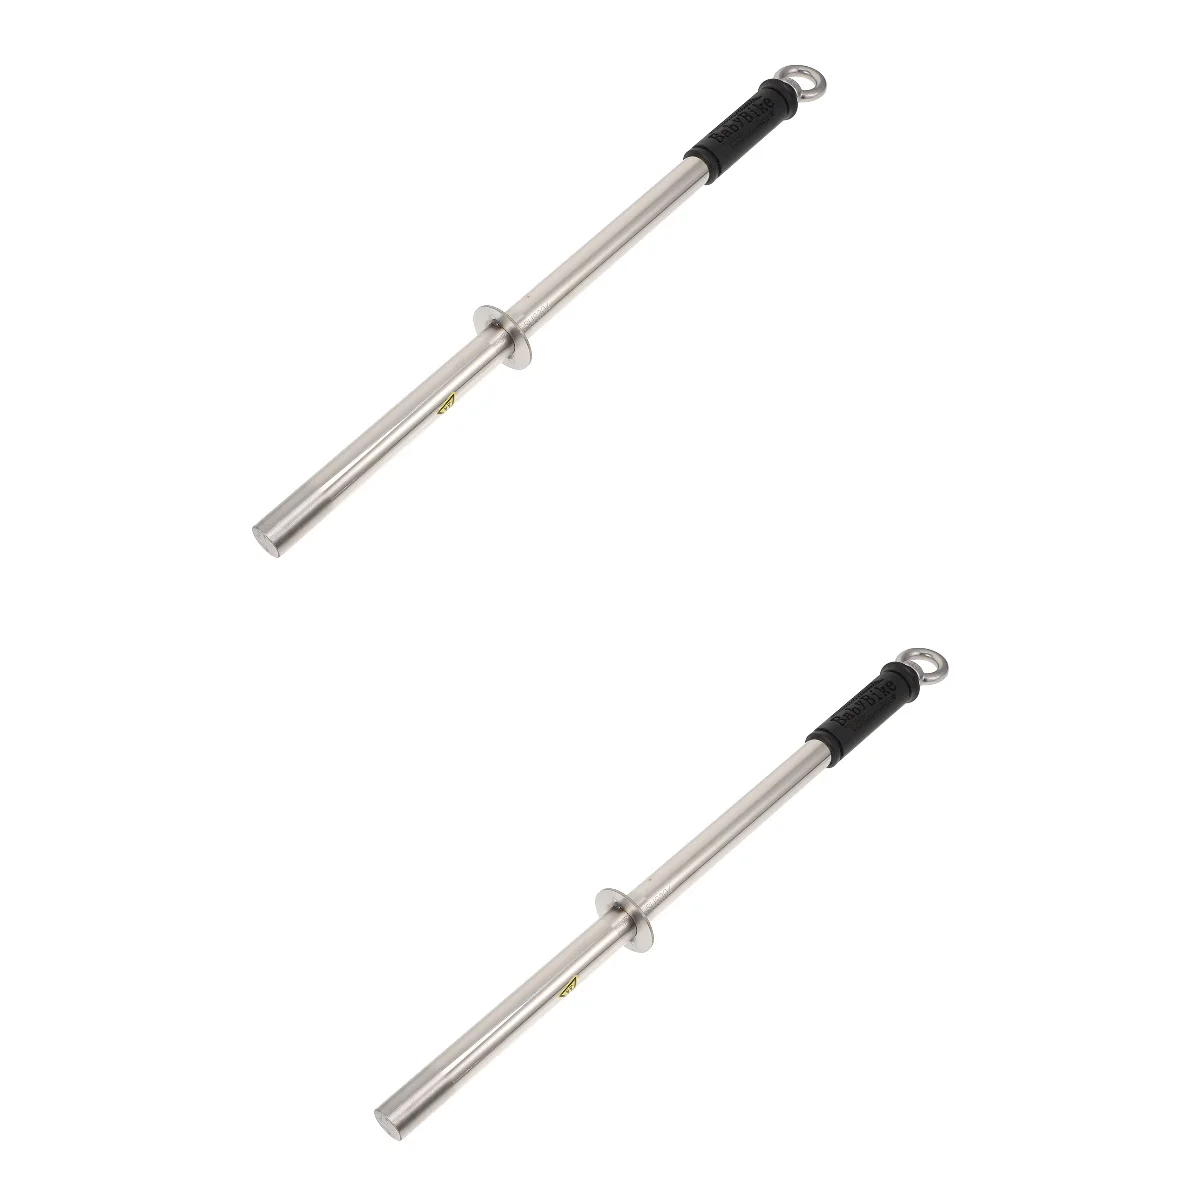 

2 PC Magnetic Nail Sweeper Iron Absorber Swarf Collect Tool Stainless Steel Pick Up Rod Hand Pick-up